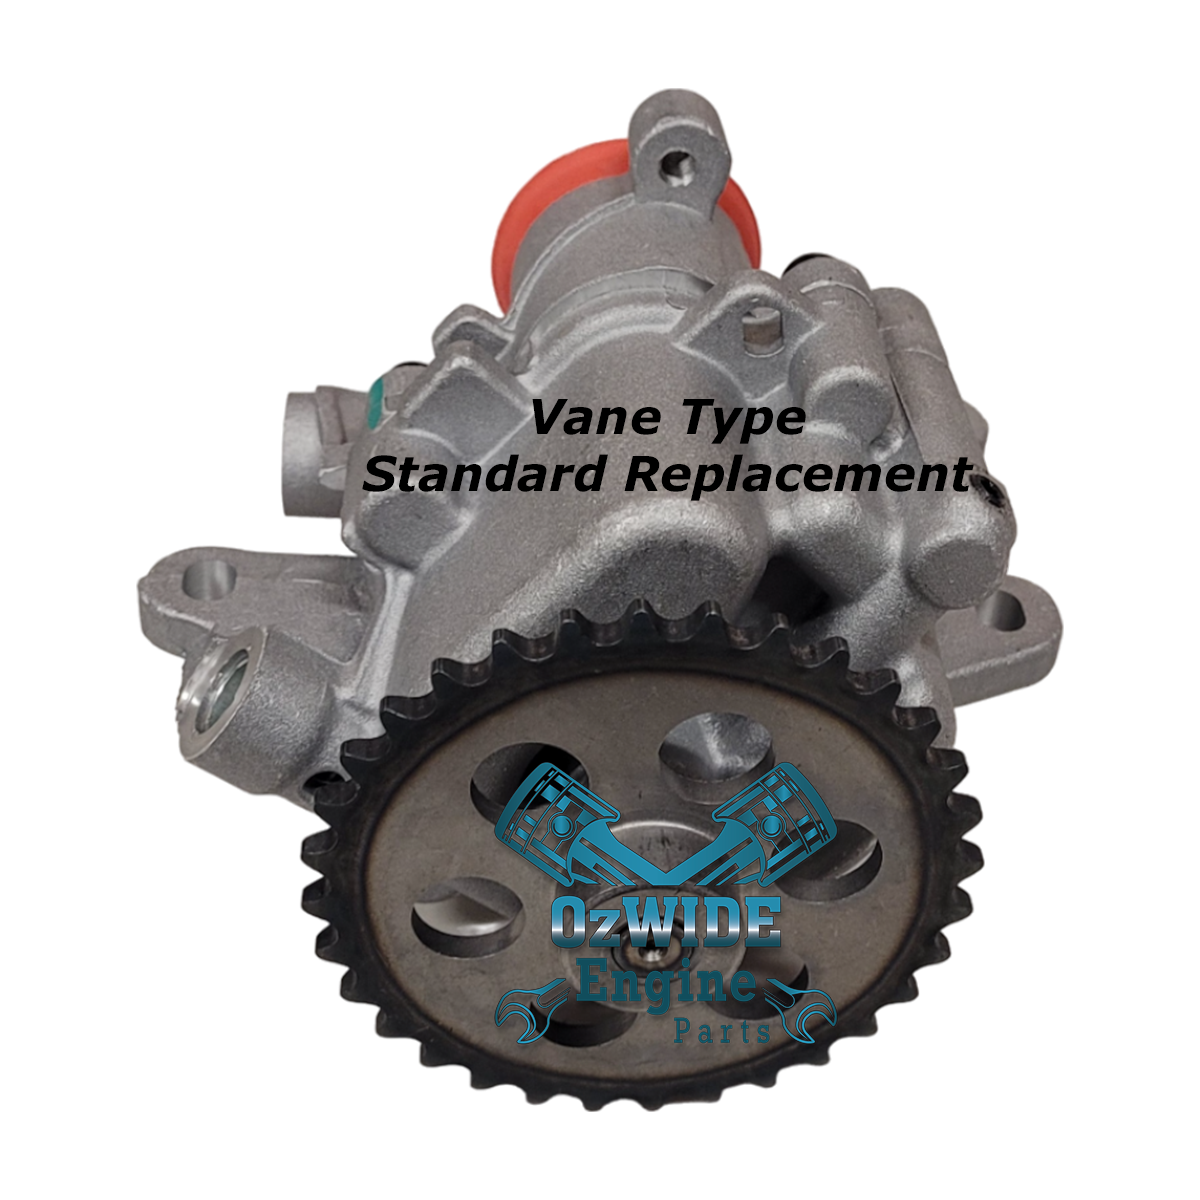 Ford Ranger, Mazda BT50 P4AT, P5AT Vane Type oil pump, Standard replacement oil pump, Picture 1